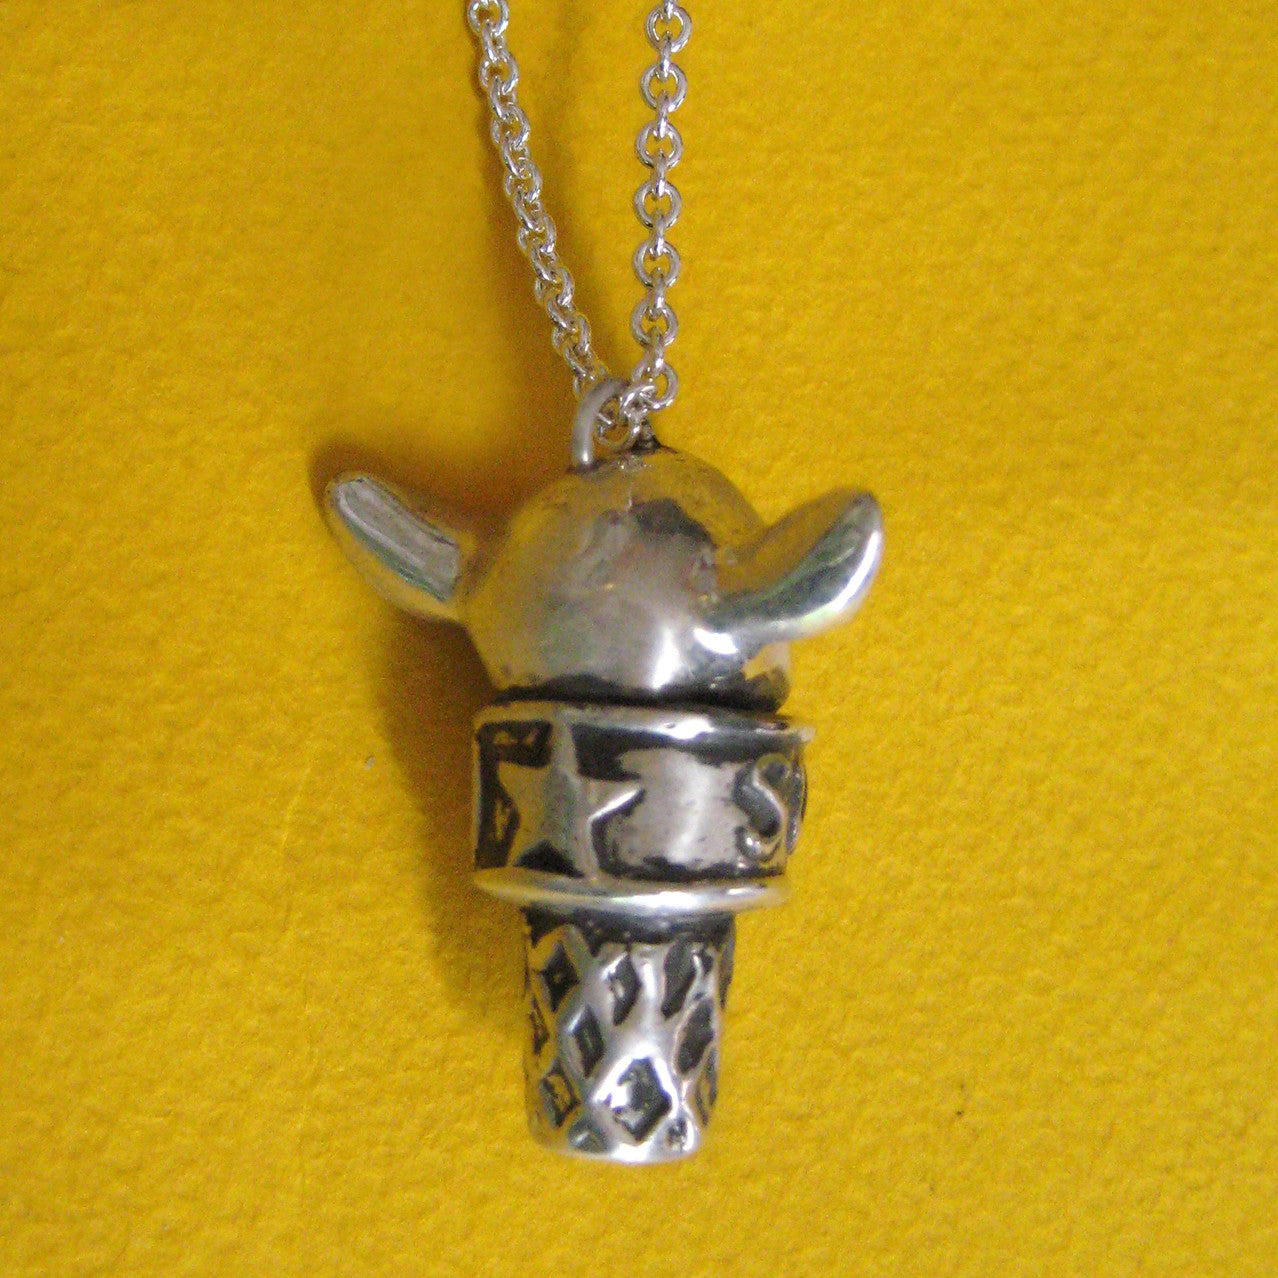 Scoop of Deer Necklace - Anomaly Jewelry